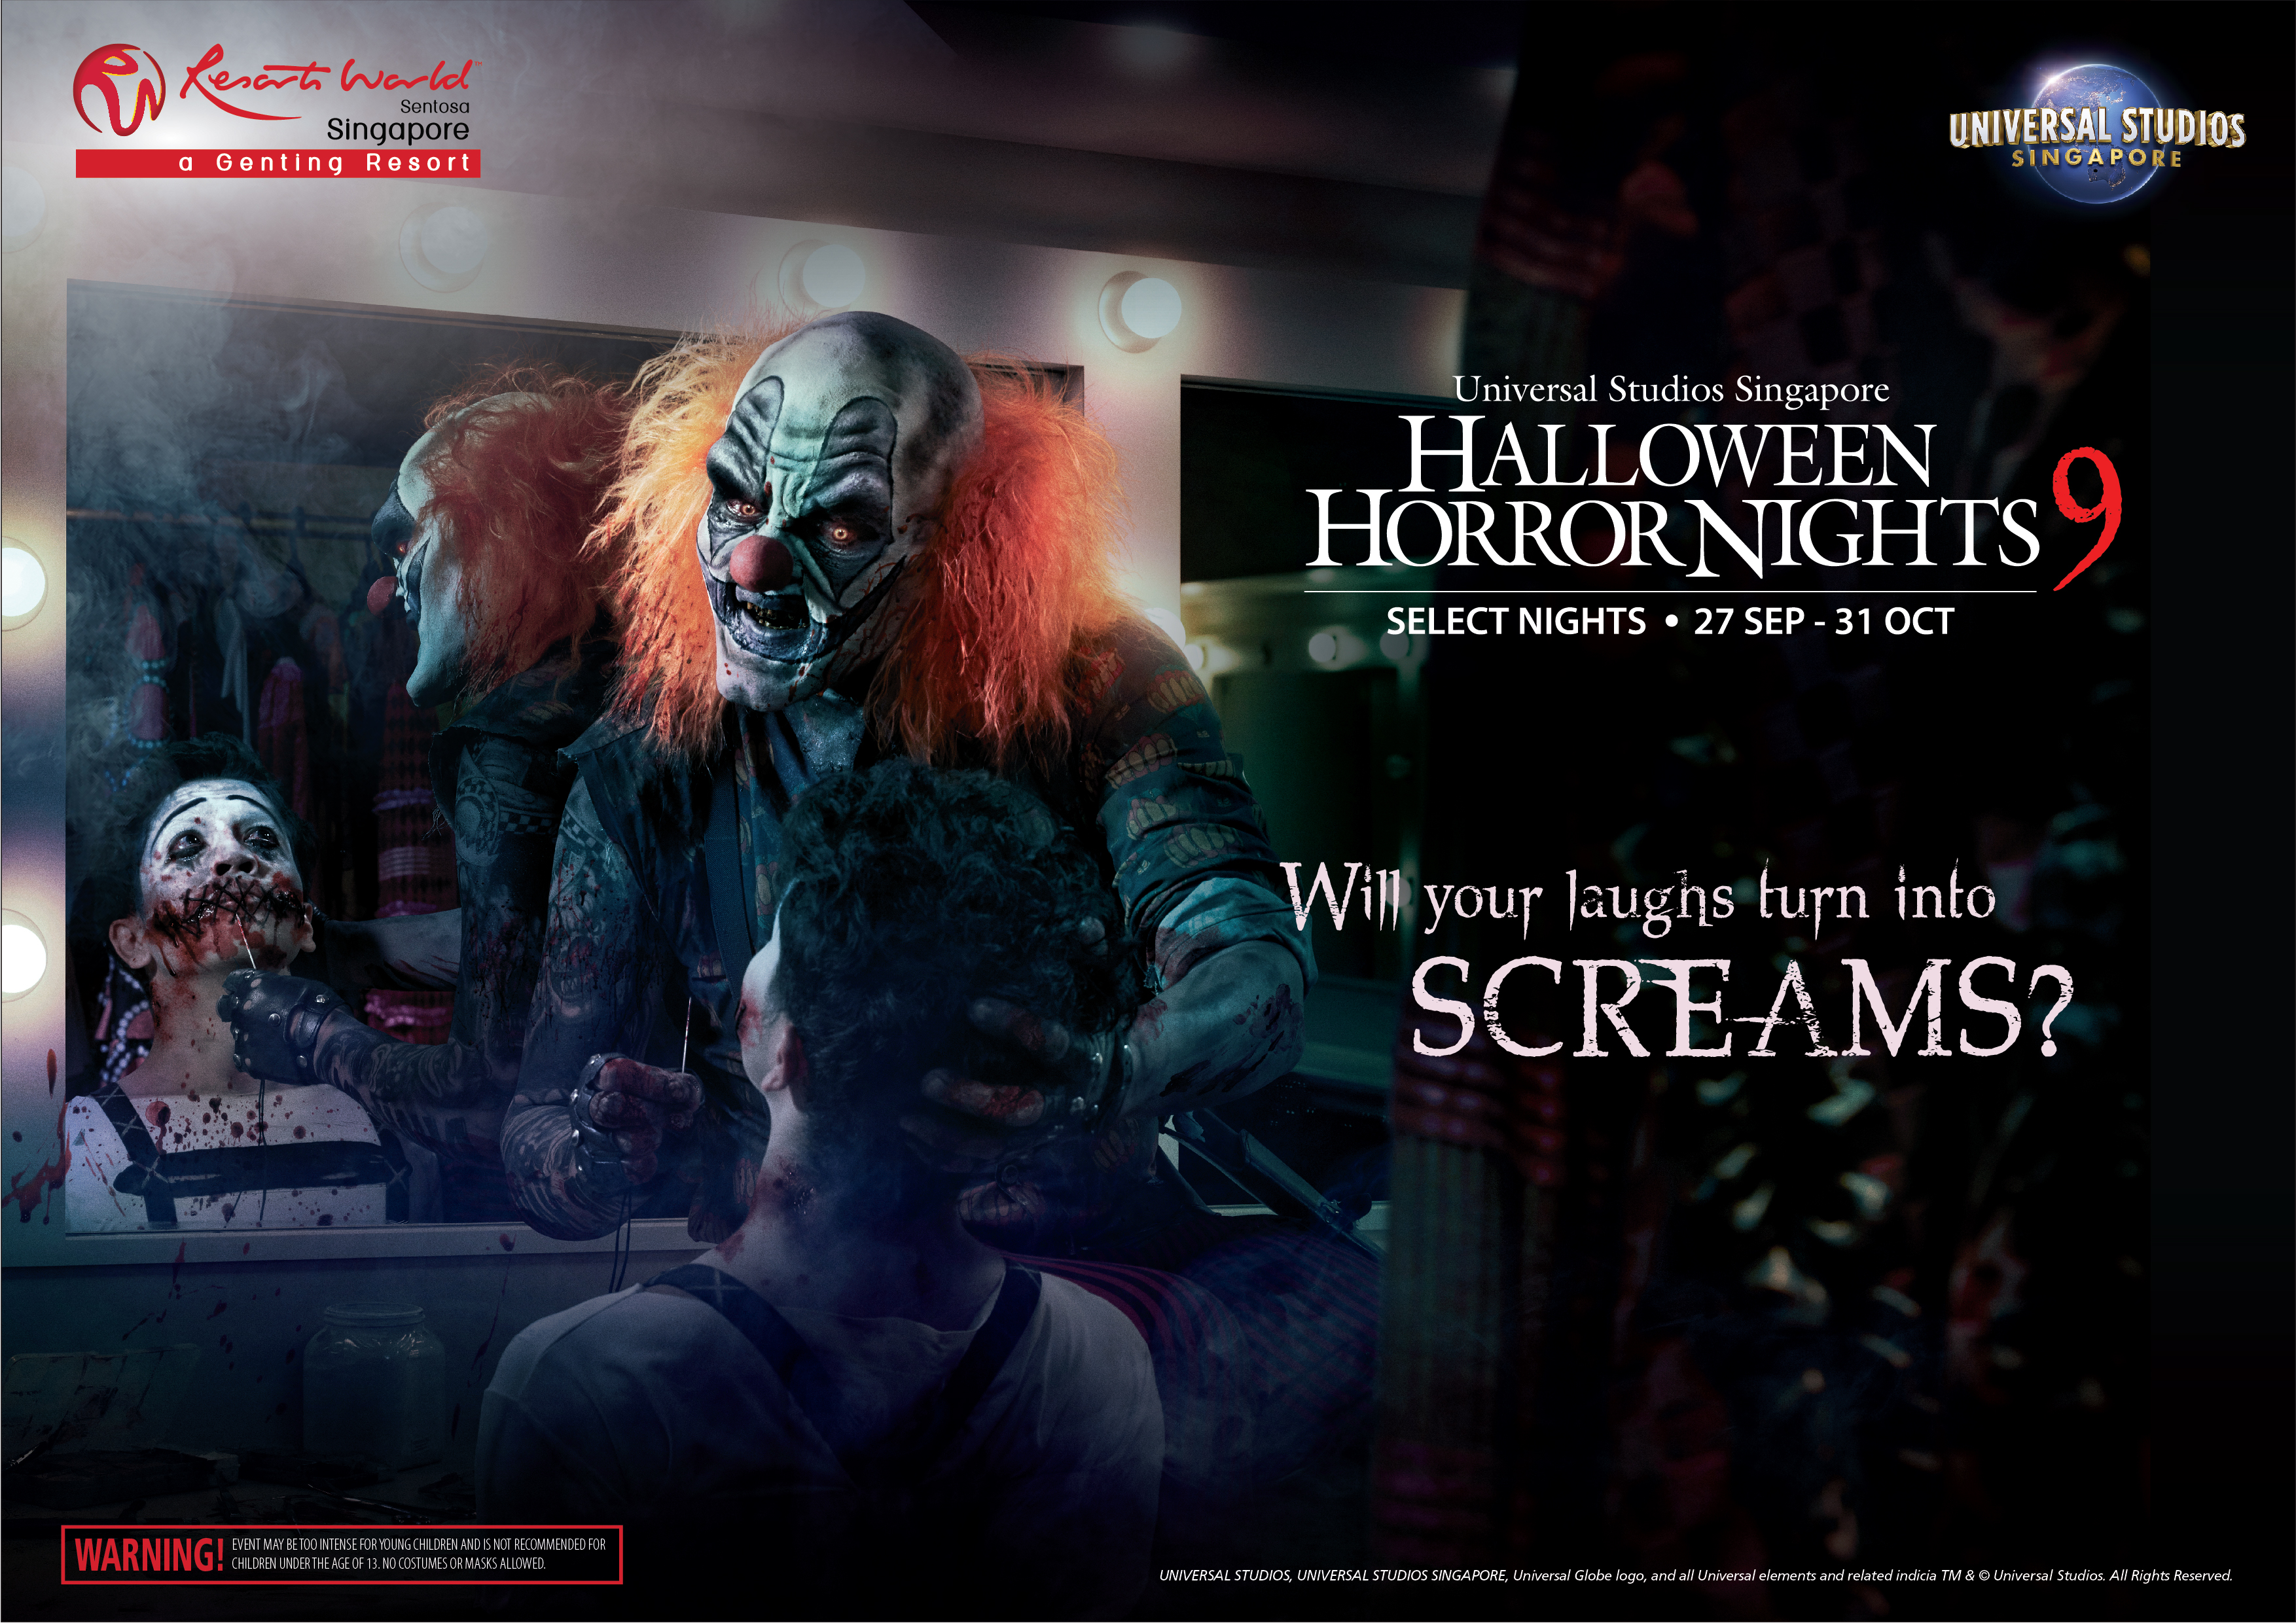 Universal Studios Singapore’s Halloween Horror Nights Returns with First-Ever Haunted House